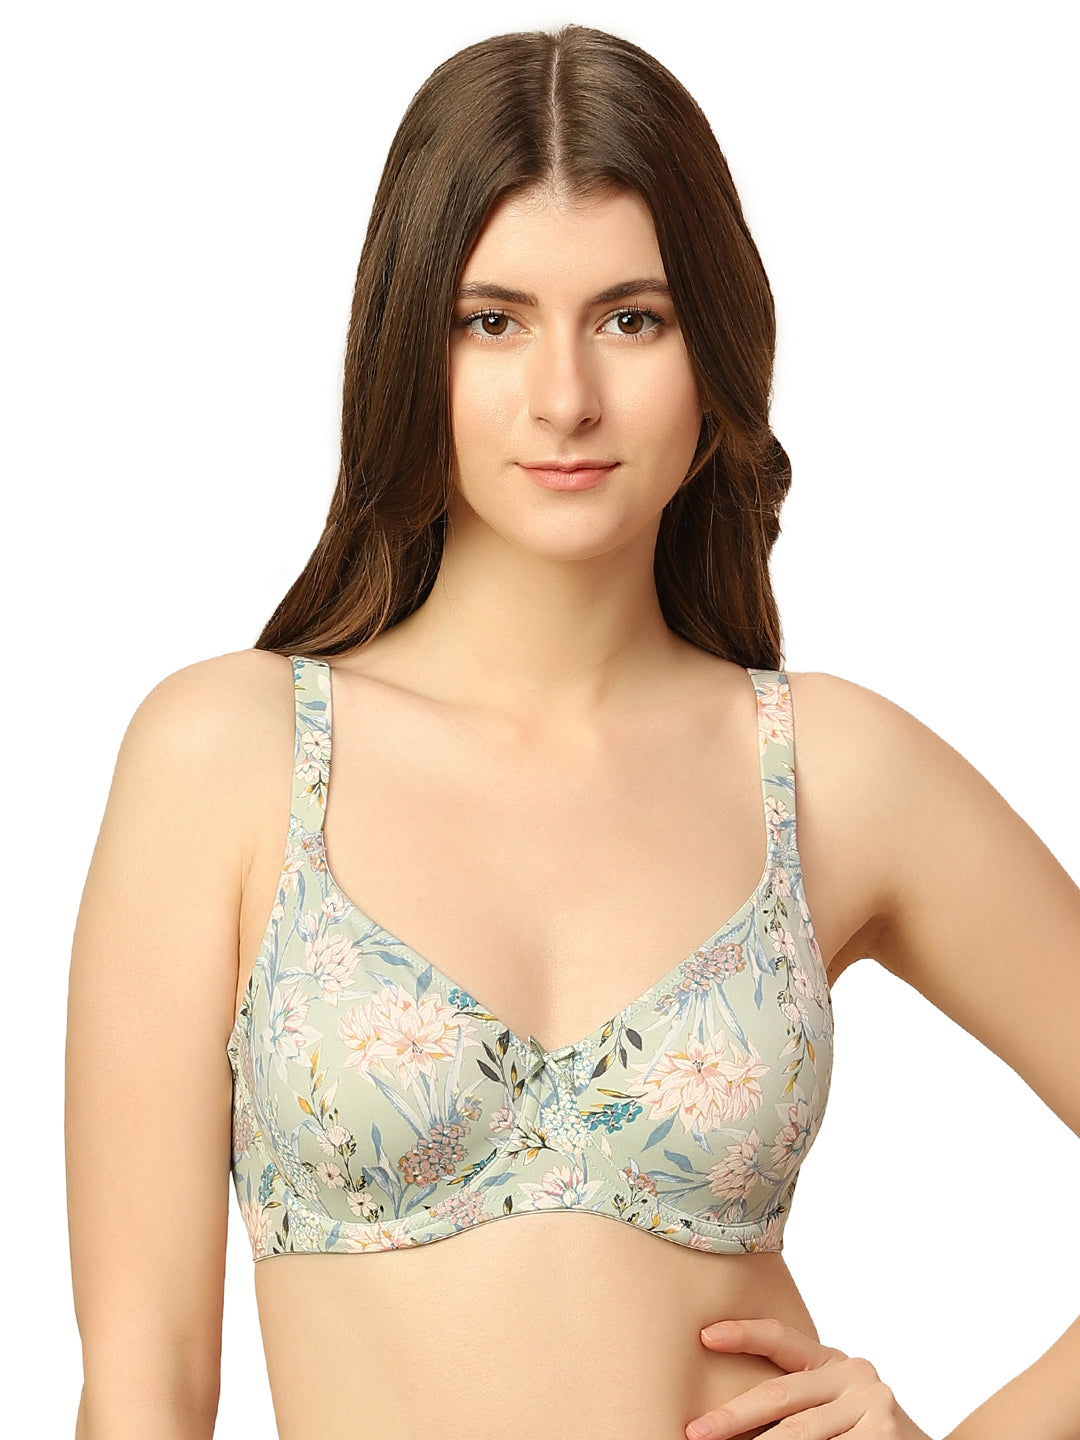 TRIUMPH-151I201 MINIMIZER 75 Support Wired Non Padded Comfortable High Support Big-Cup Bra